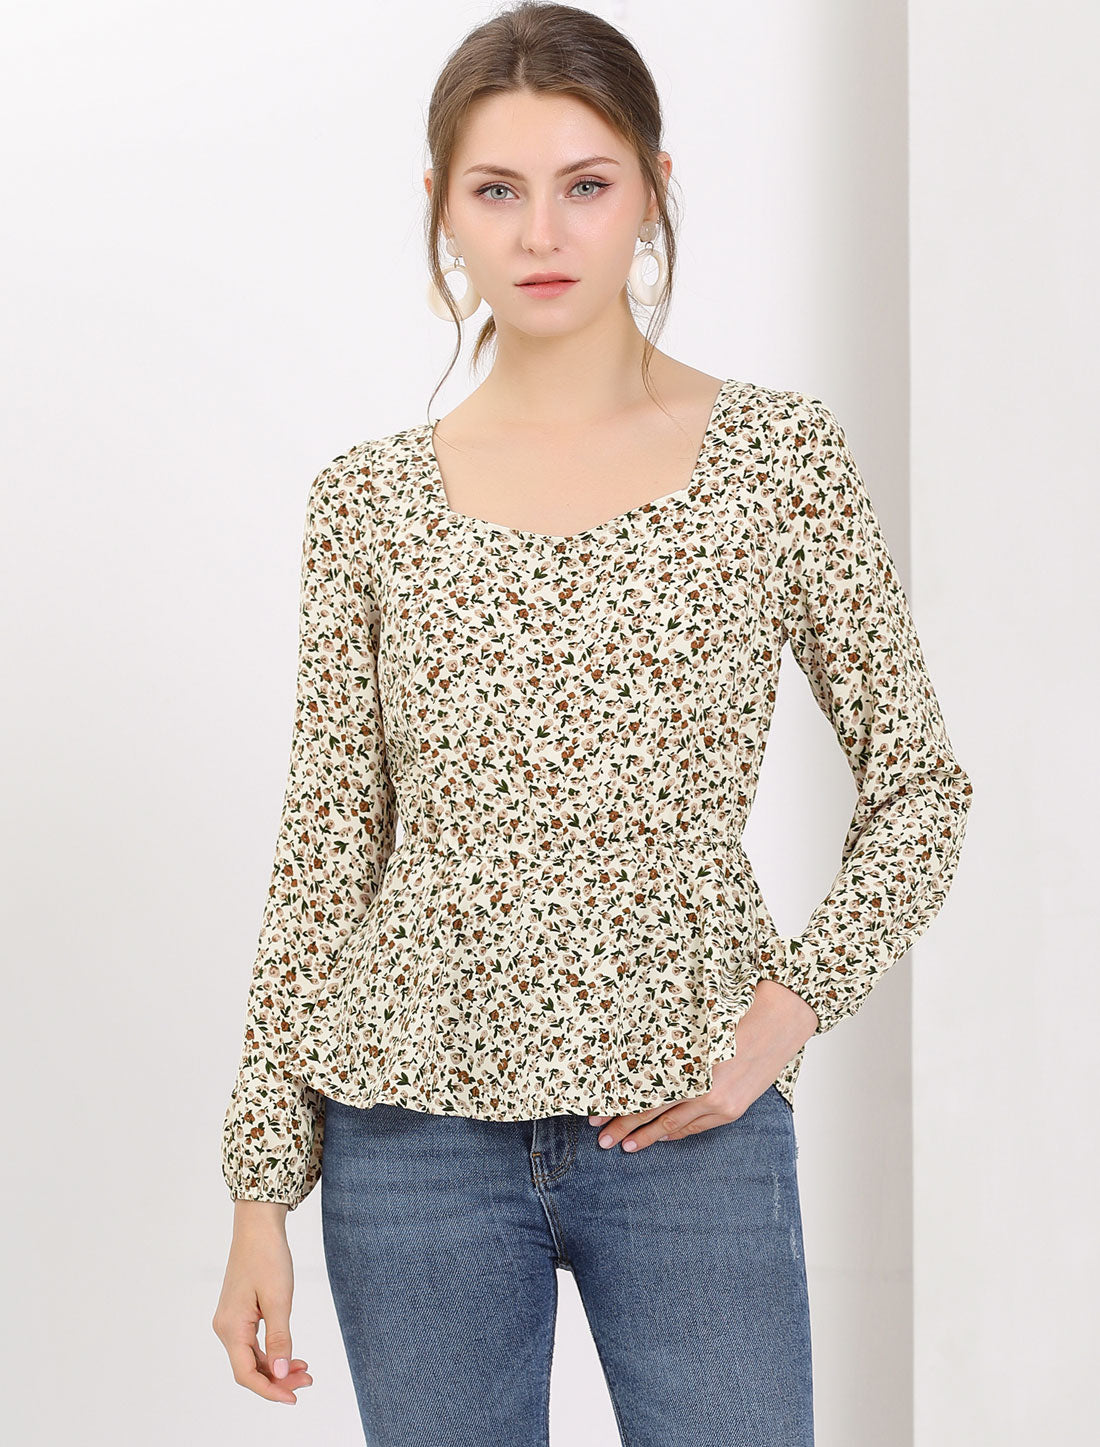 Allegra K Long Sleeve Square Neck Belted Peplum Floral Top Blouse